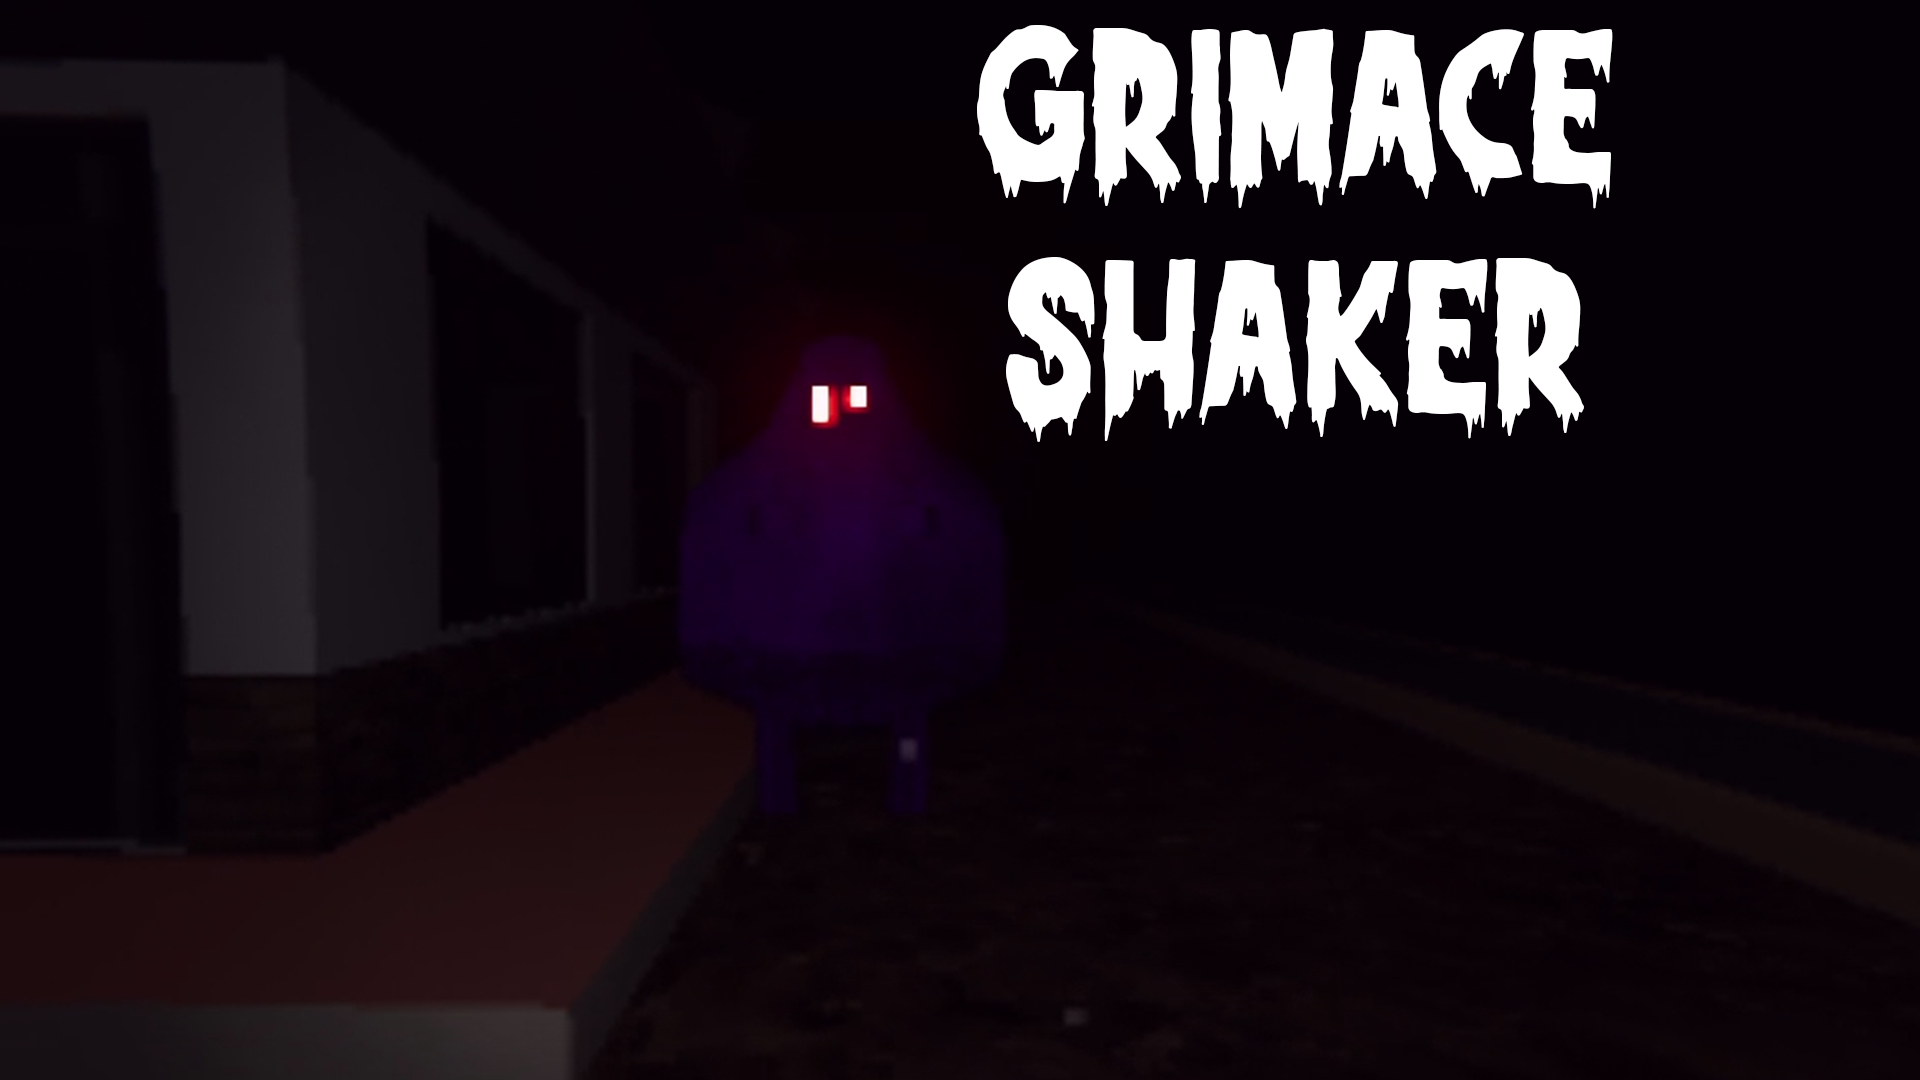 Grimace Shaker by Dubscr